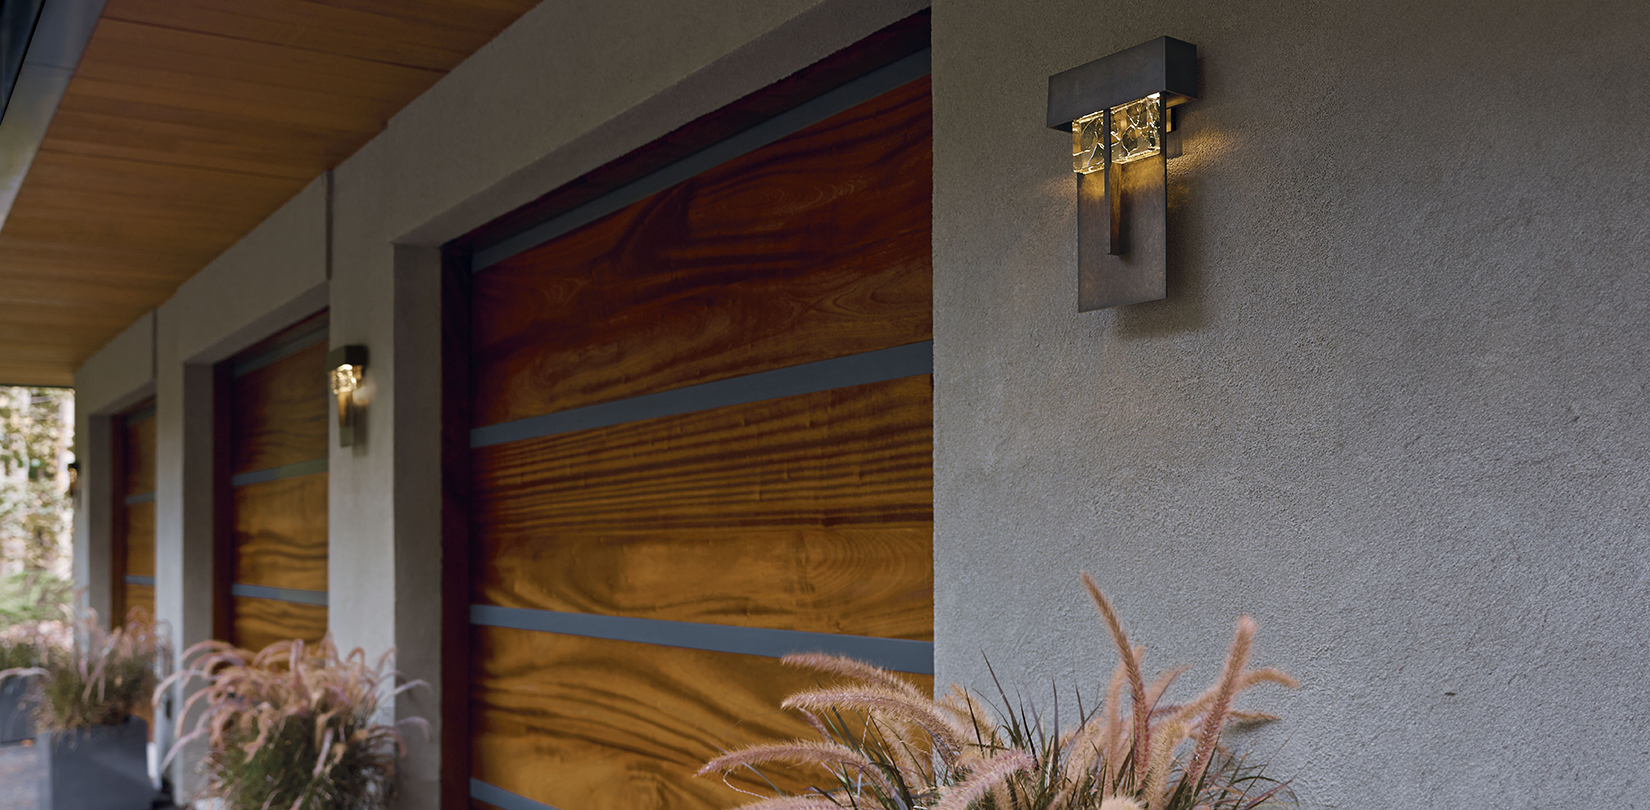 The Stunning Shard Sconce Lighting: A Fusion of Creativity and Sustainability